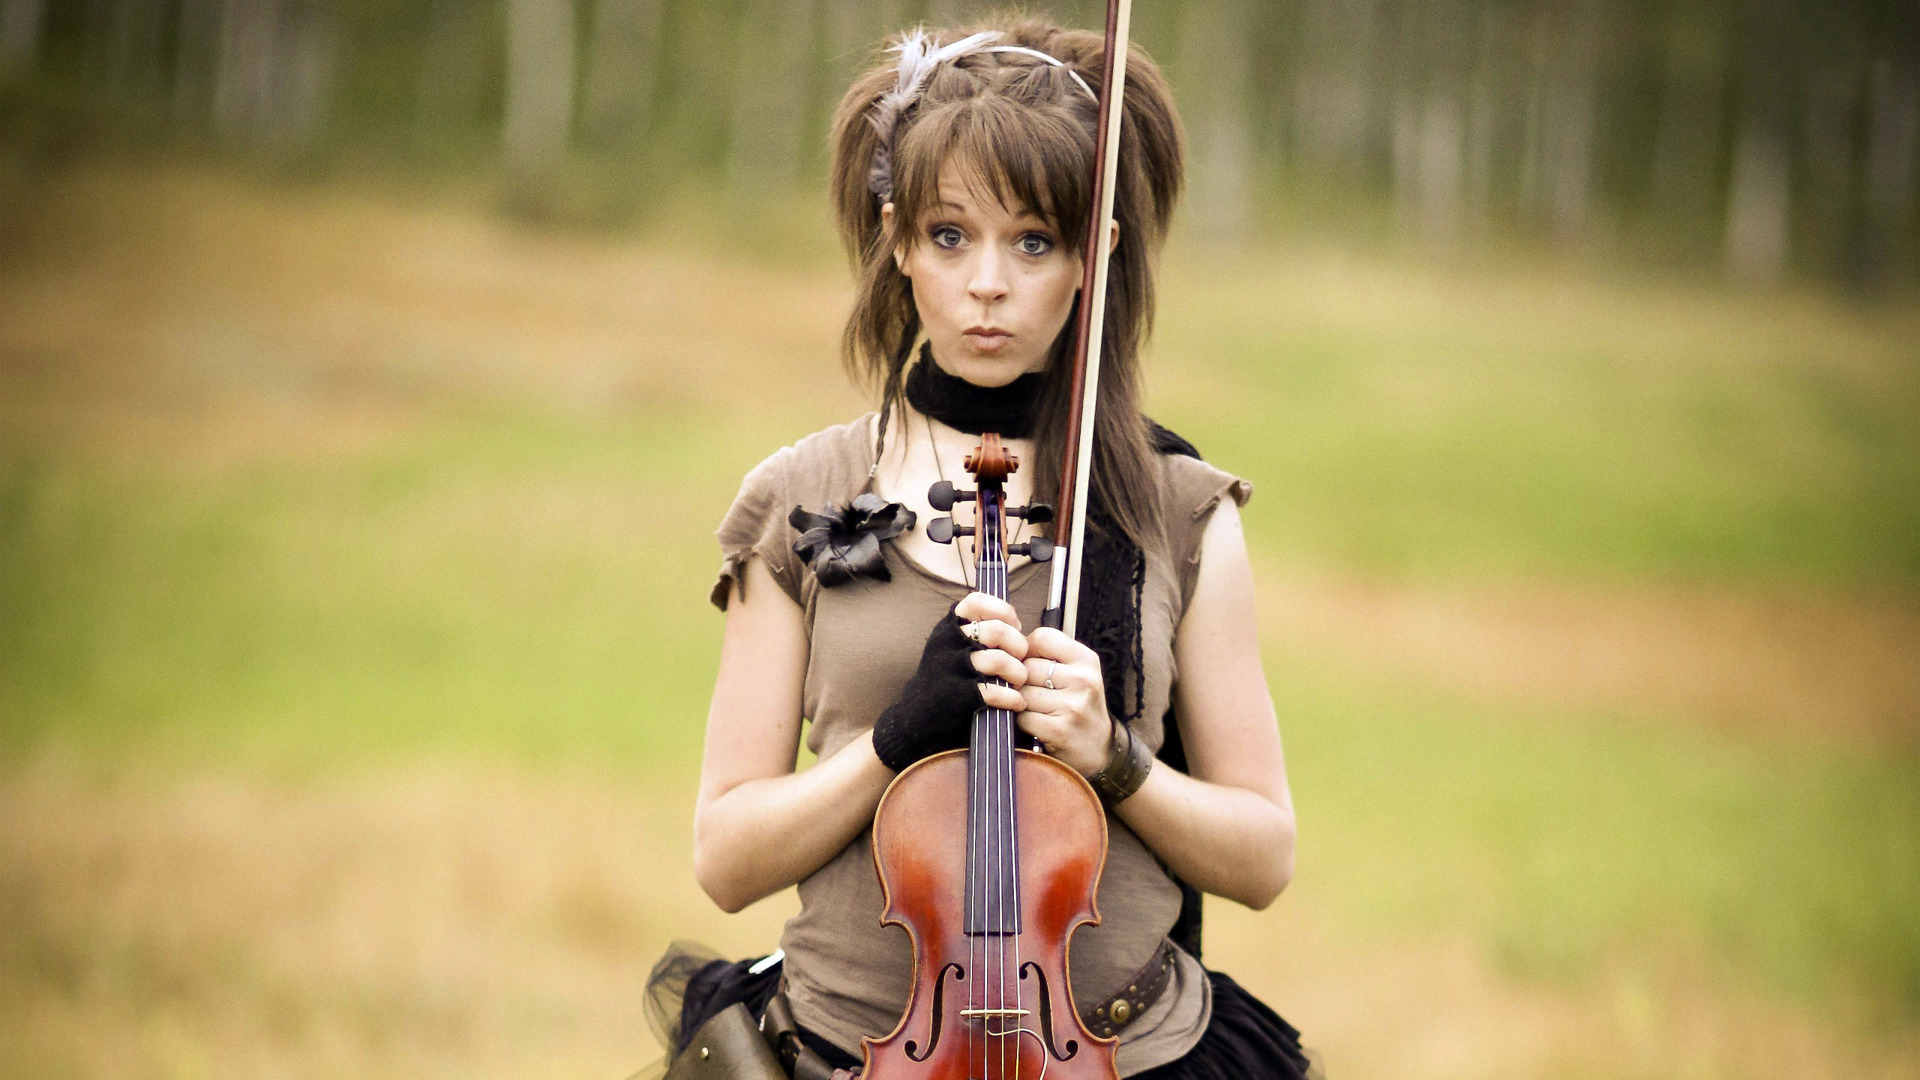 Lindsey Stirling Violin Women Musician Celebrity Blurry Background Women Outdoors Looking At Viewer 1920x1080